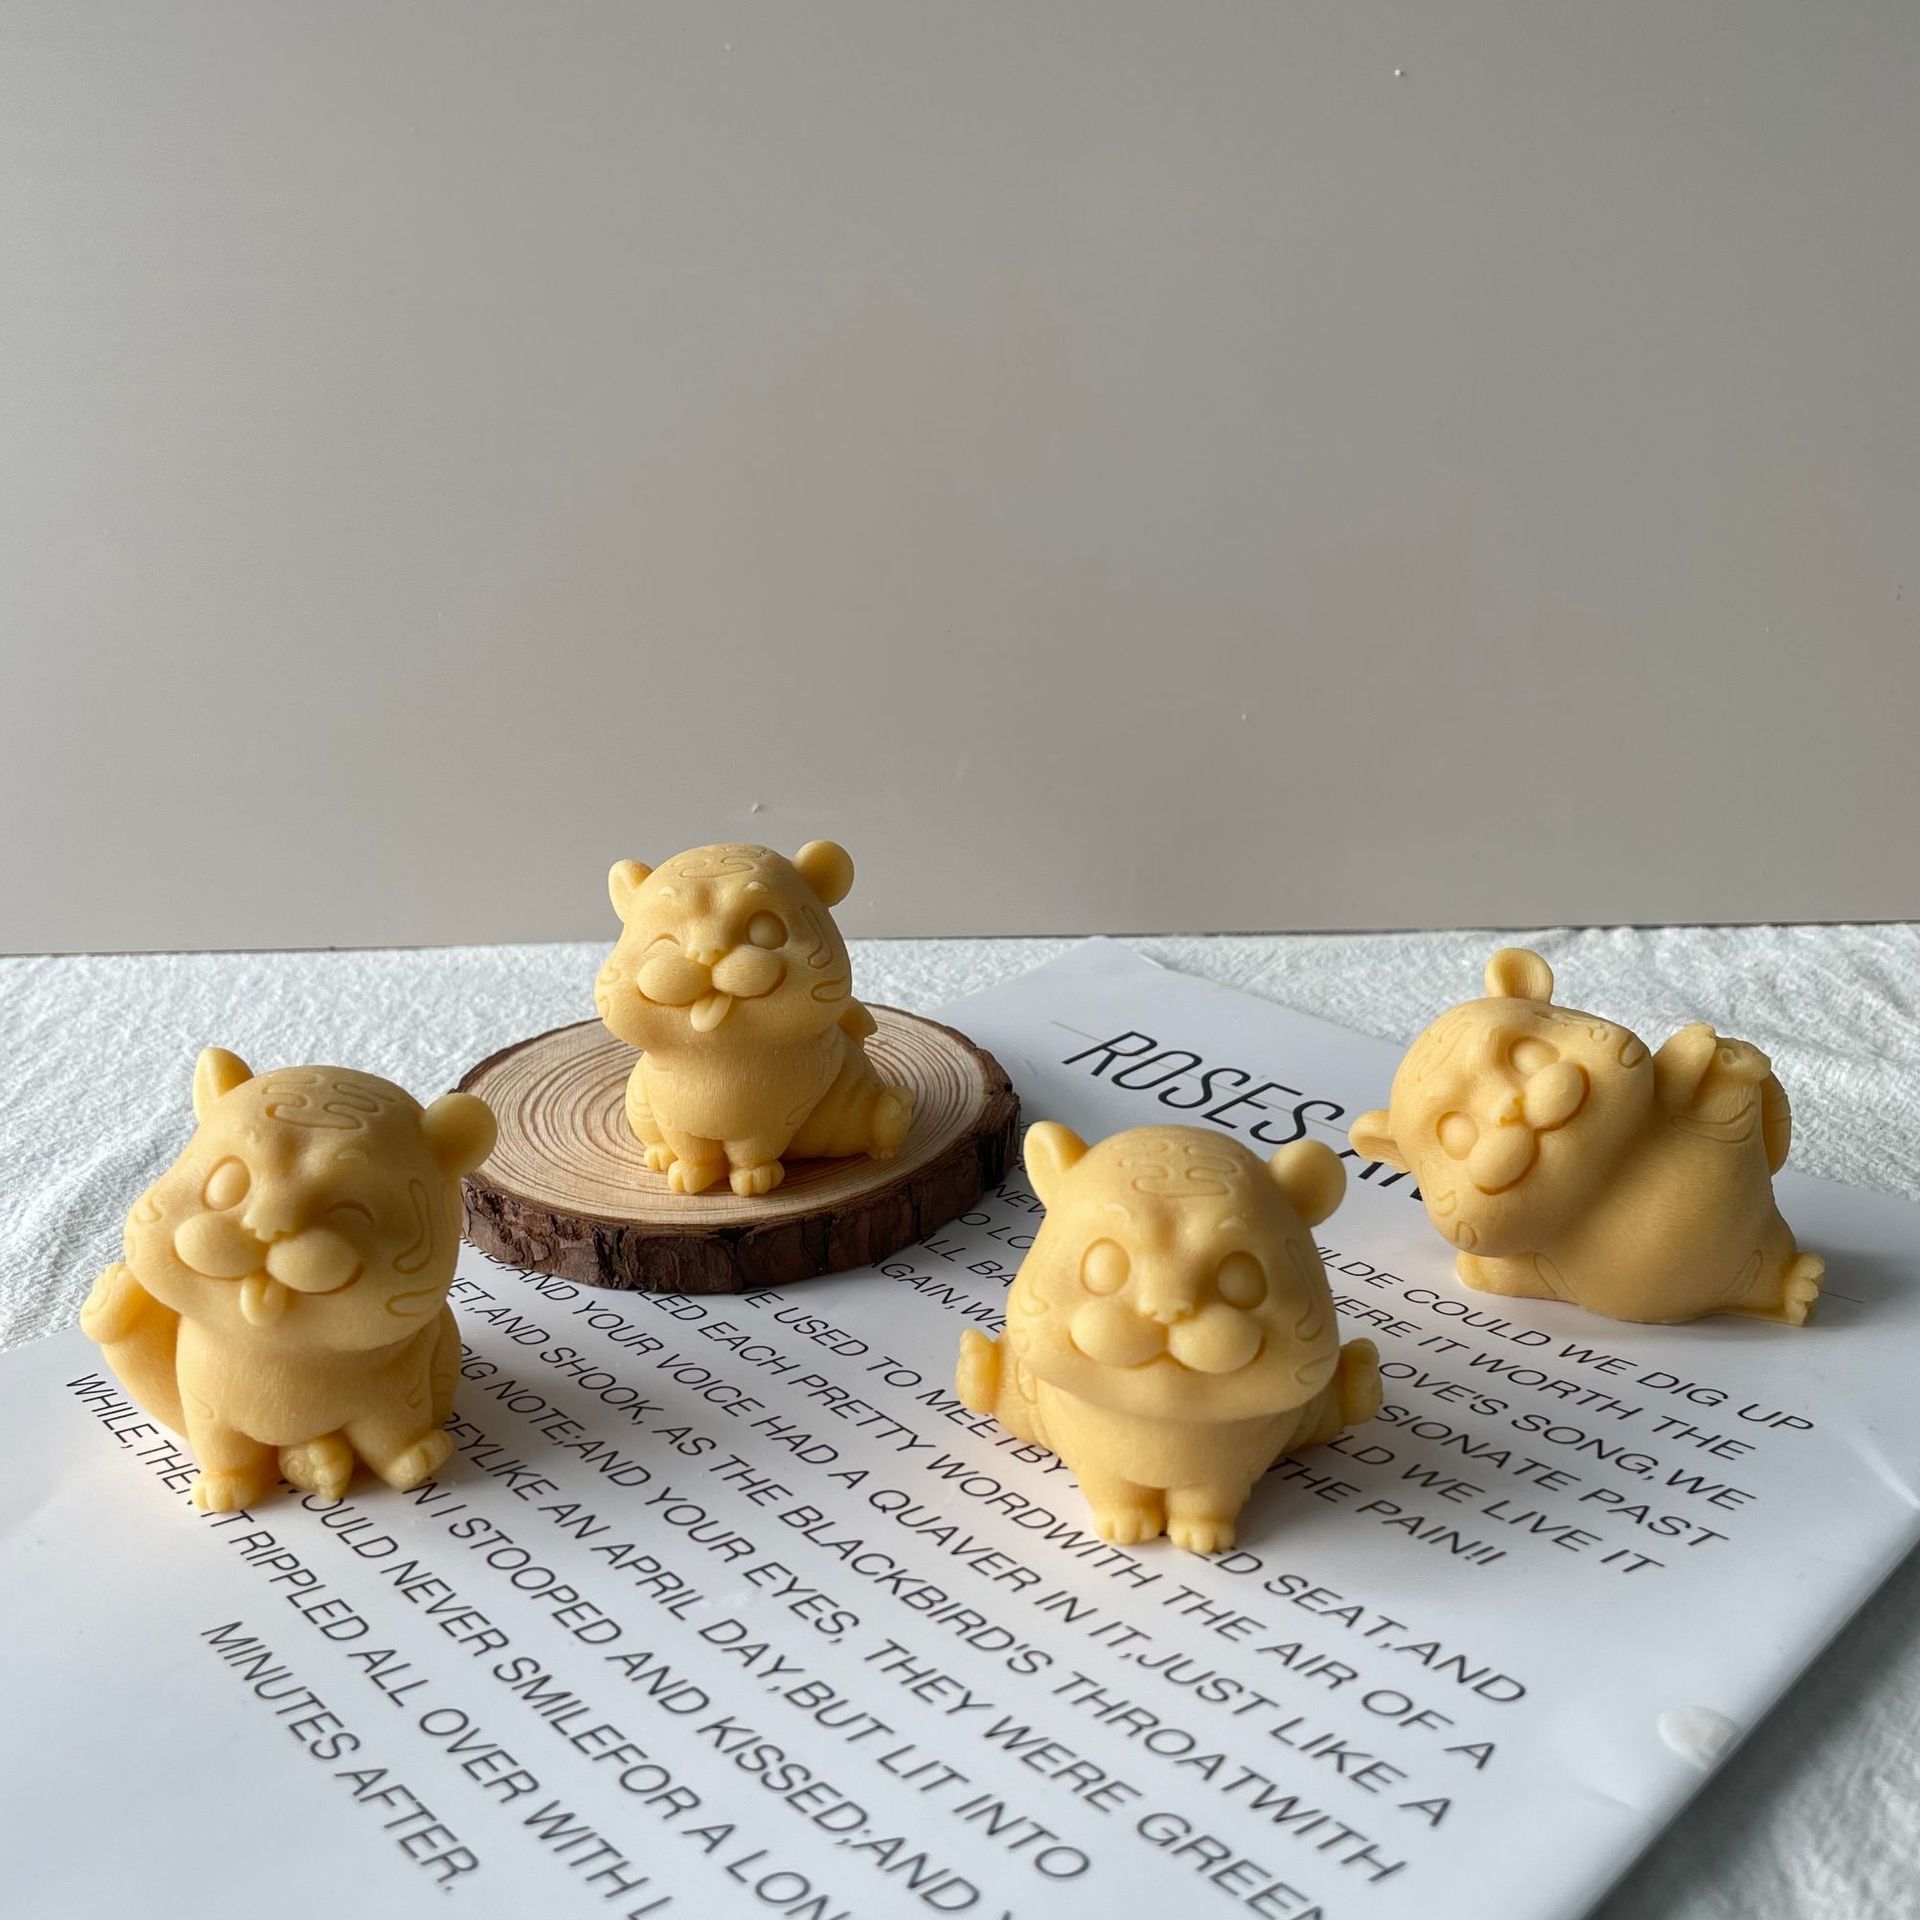 J6-96 2022 New Design Cute Tiger Silicone Soap Mold DIY Gypsum Ornaments Making Mould 3D Tiger Silicone Candle Mold